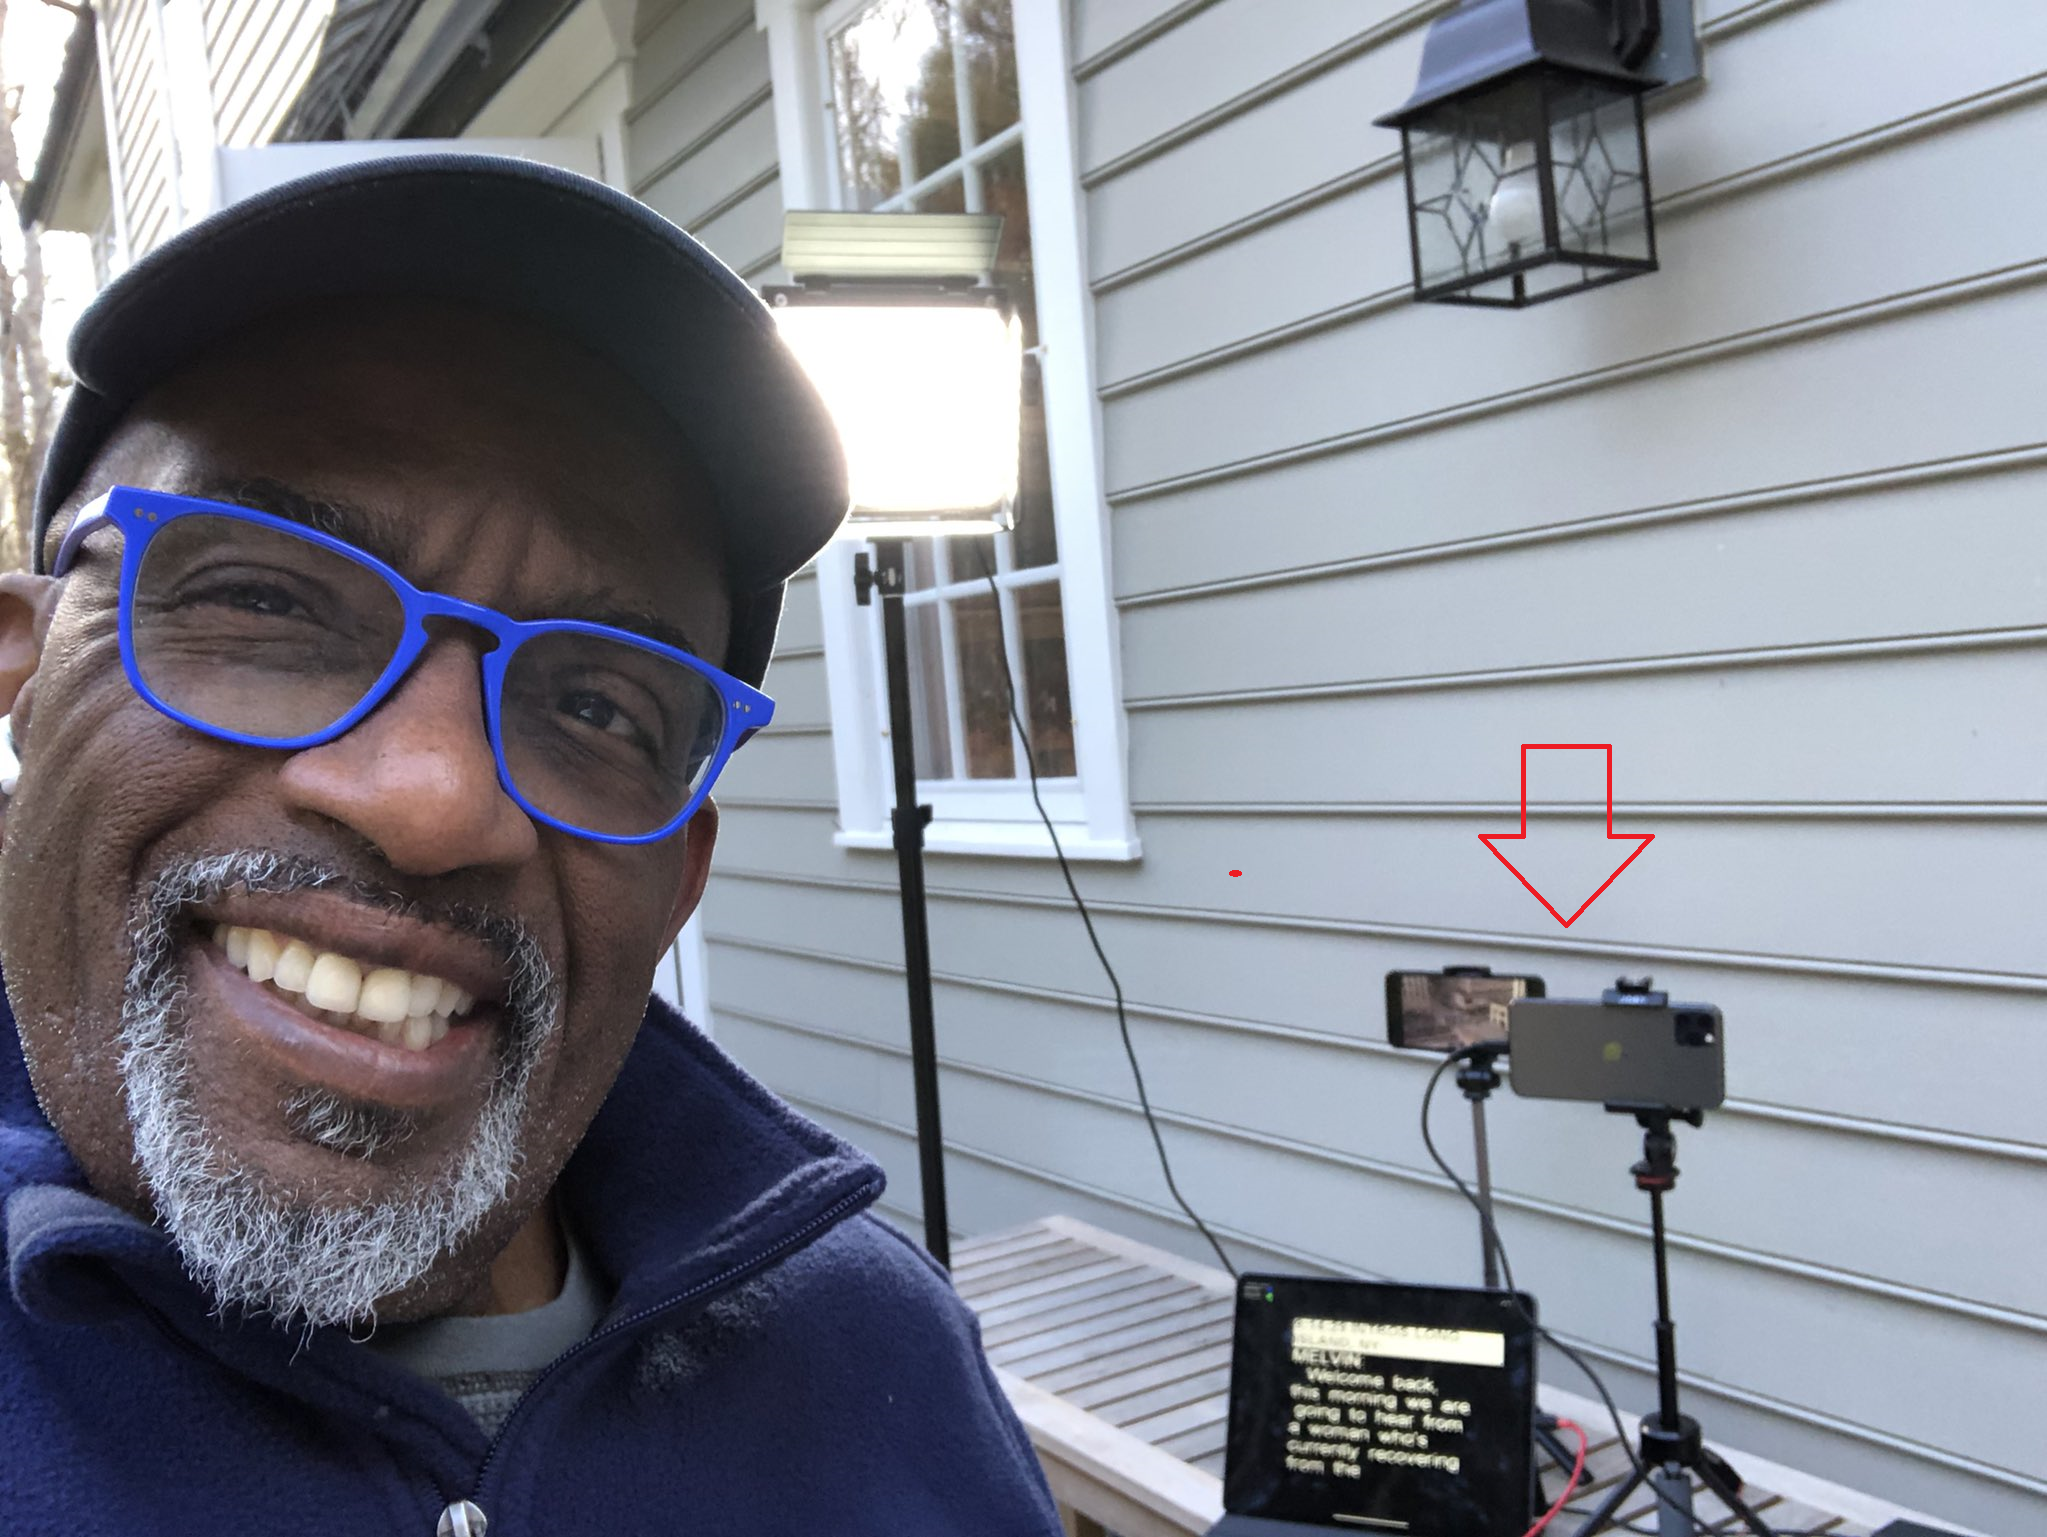 NBC's Al Roker poses with the iPhone units and the iPad he uses to broadcast live from outside his home - Three iOS devices allow Al Roker to broadcast live from home